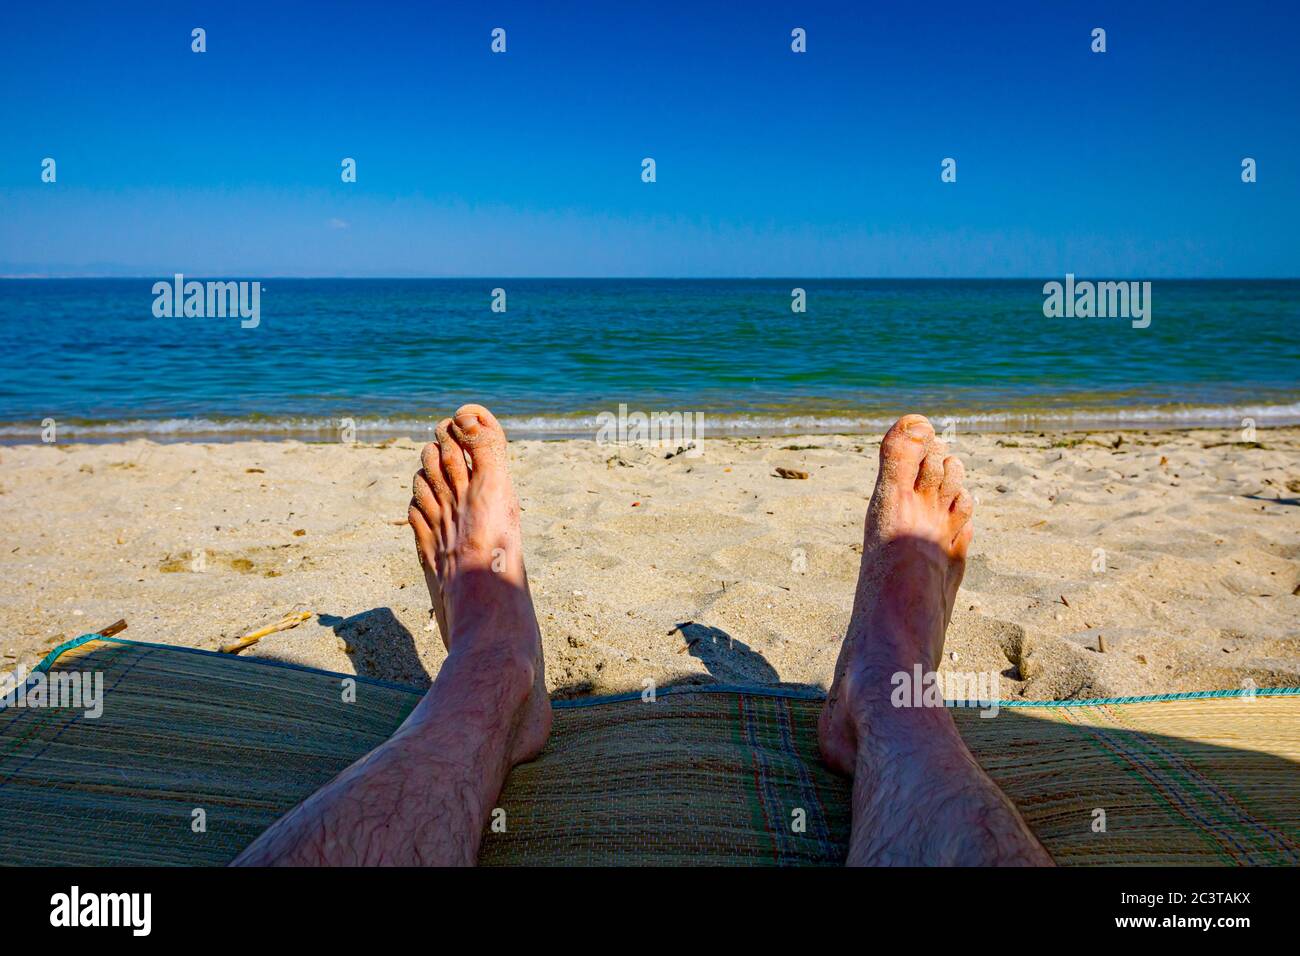 Man's legs are sunbathing by lying carefree on mat next to the coastline, on public beach. Stock Photo